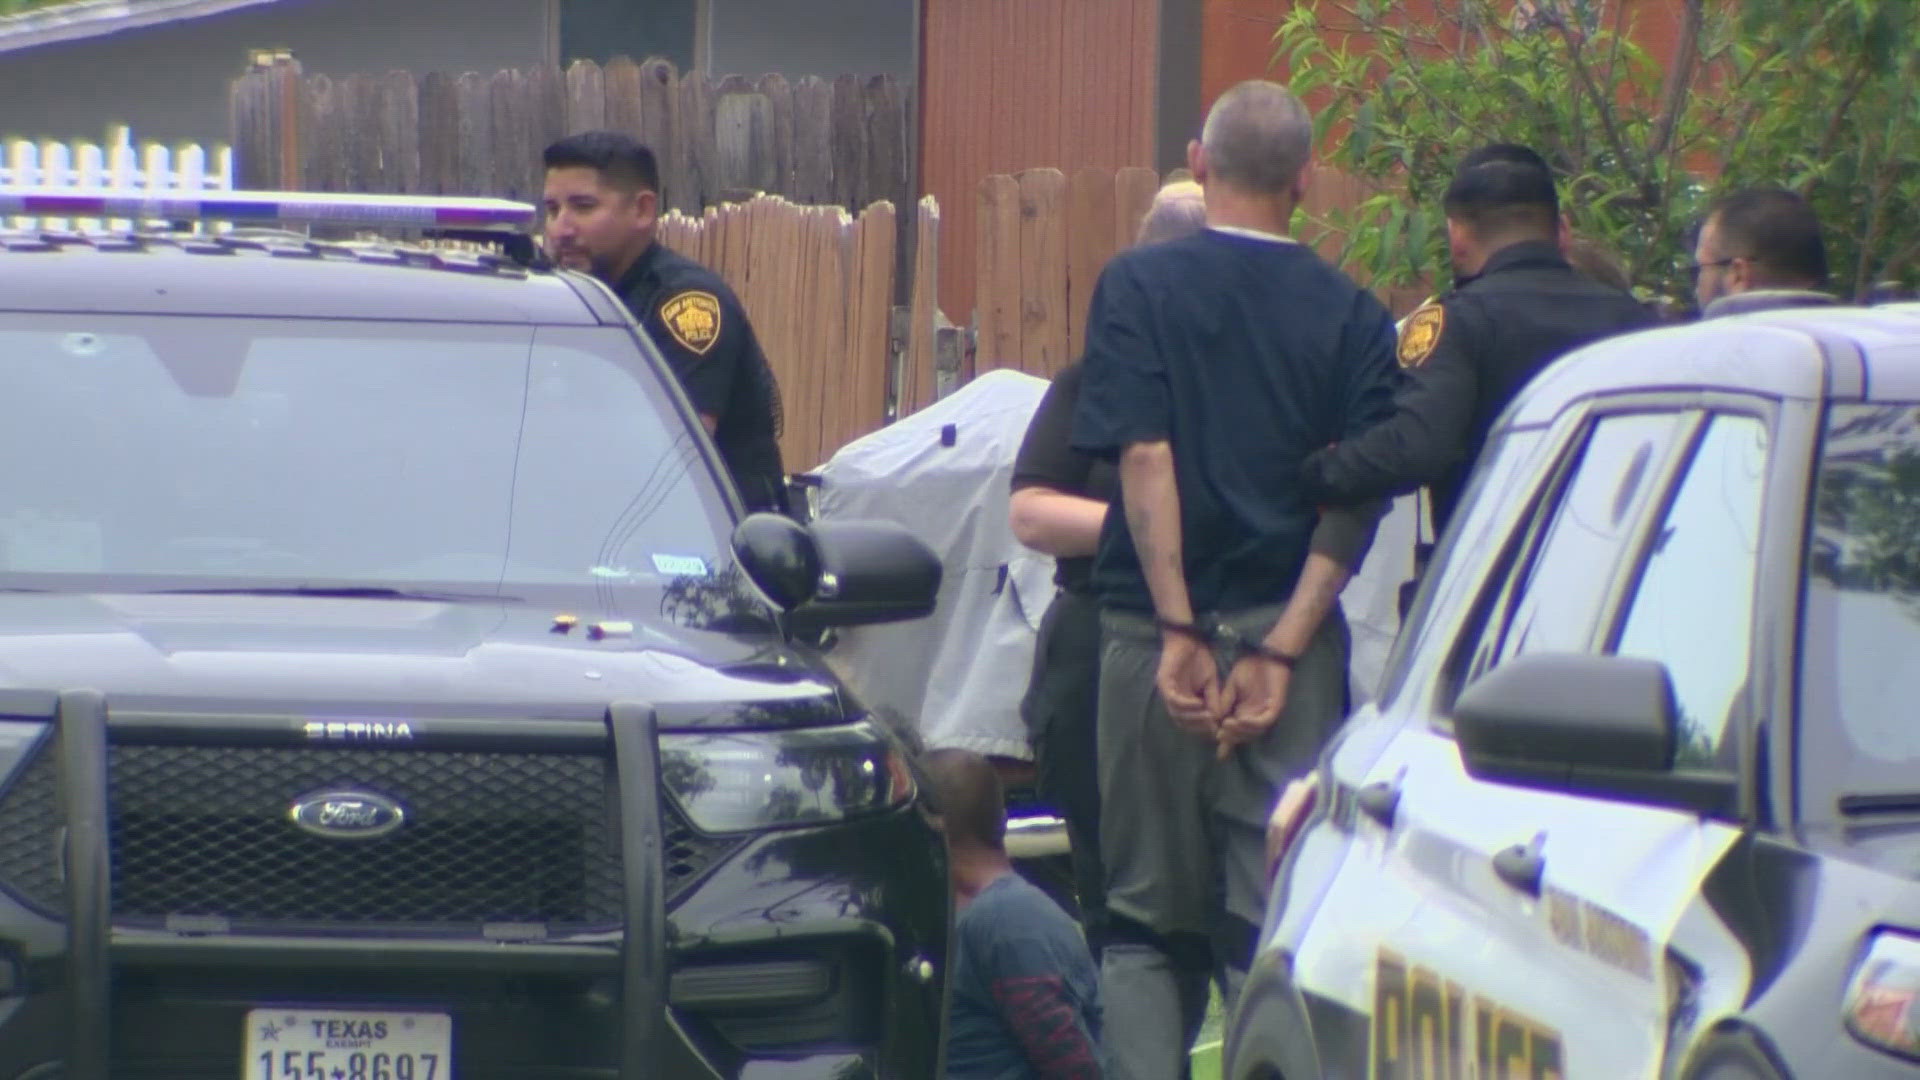 Seven people detained at home that was raided on the south side